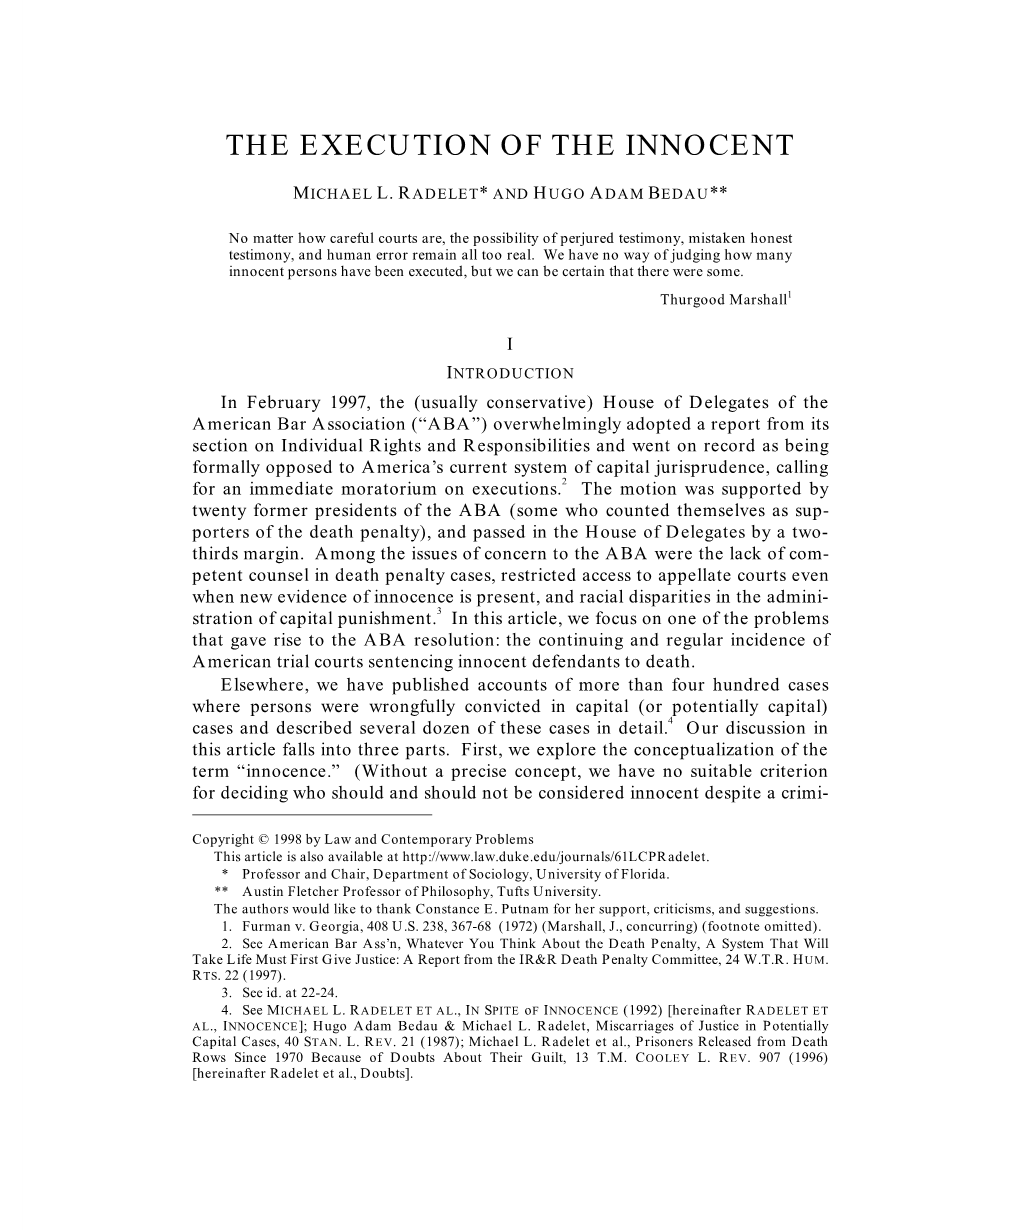 The Execution of the Innocent